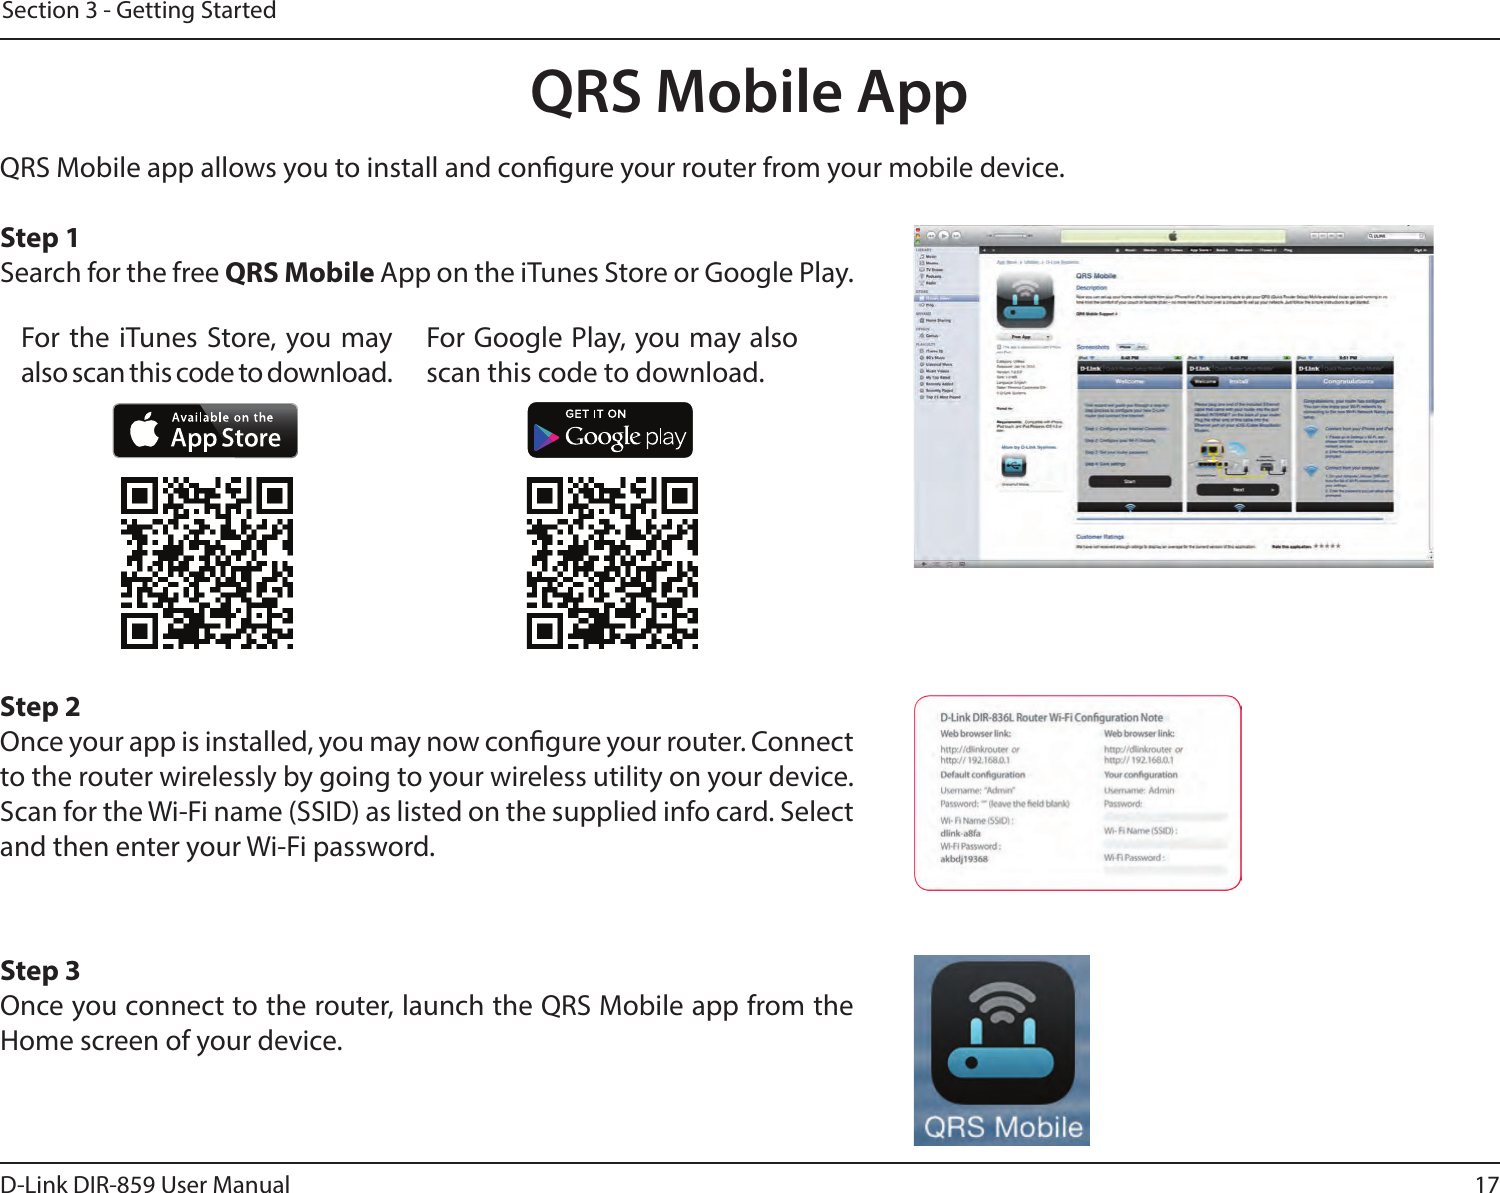 17D-Link DIR-859 User ManualSection 3 - Getting StartedQRS Mobile AppQRS Mobile app allows you to install and congure your router from your mobile device. Step 1Search for the free QRS Mobile App on the iTunes Store or Google Play.Step 2Once your app is installed, you may now congure your router. Connect to the router wirelessly by going to your wireless utility on your device. Scan for the Wi-Fi name (SSID) as listed on the supplied info card. Select and then enter your Wi-Fi password.Step 3Once you connect to the router, launch the QRS Mobile app from the Home screen of your device.For the iTunes Store, you may also scan this code to download.For Google Play, you may also scan this code to download.